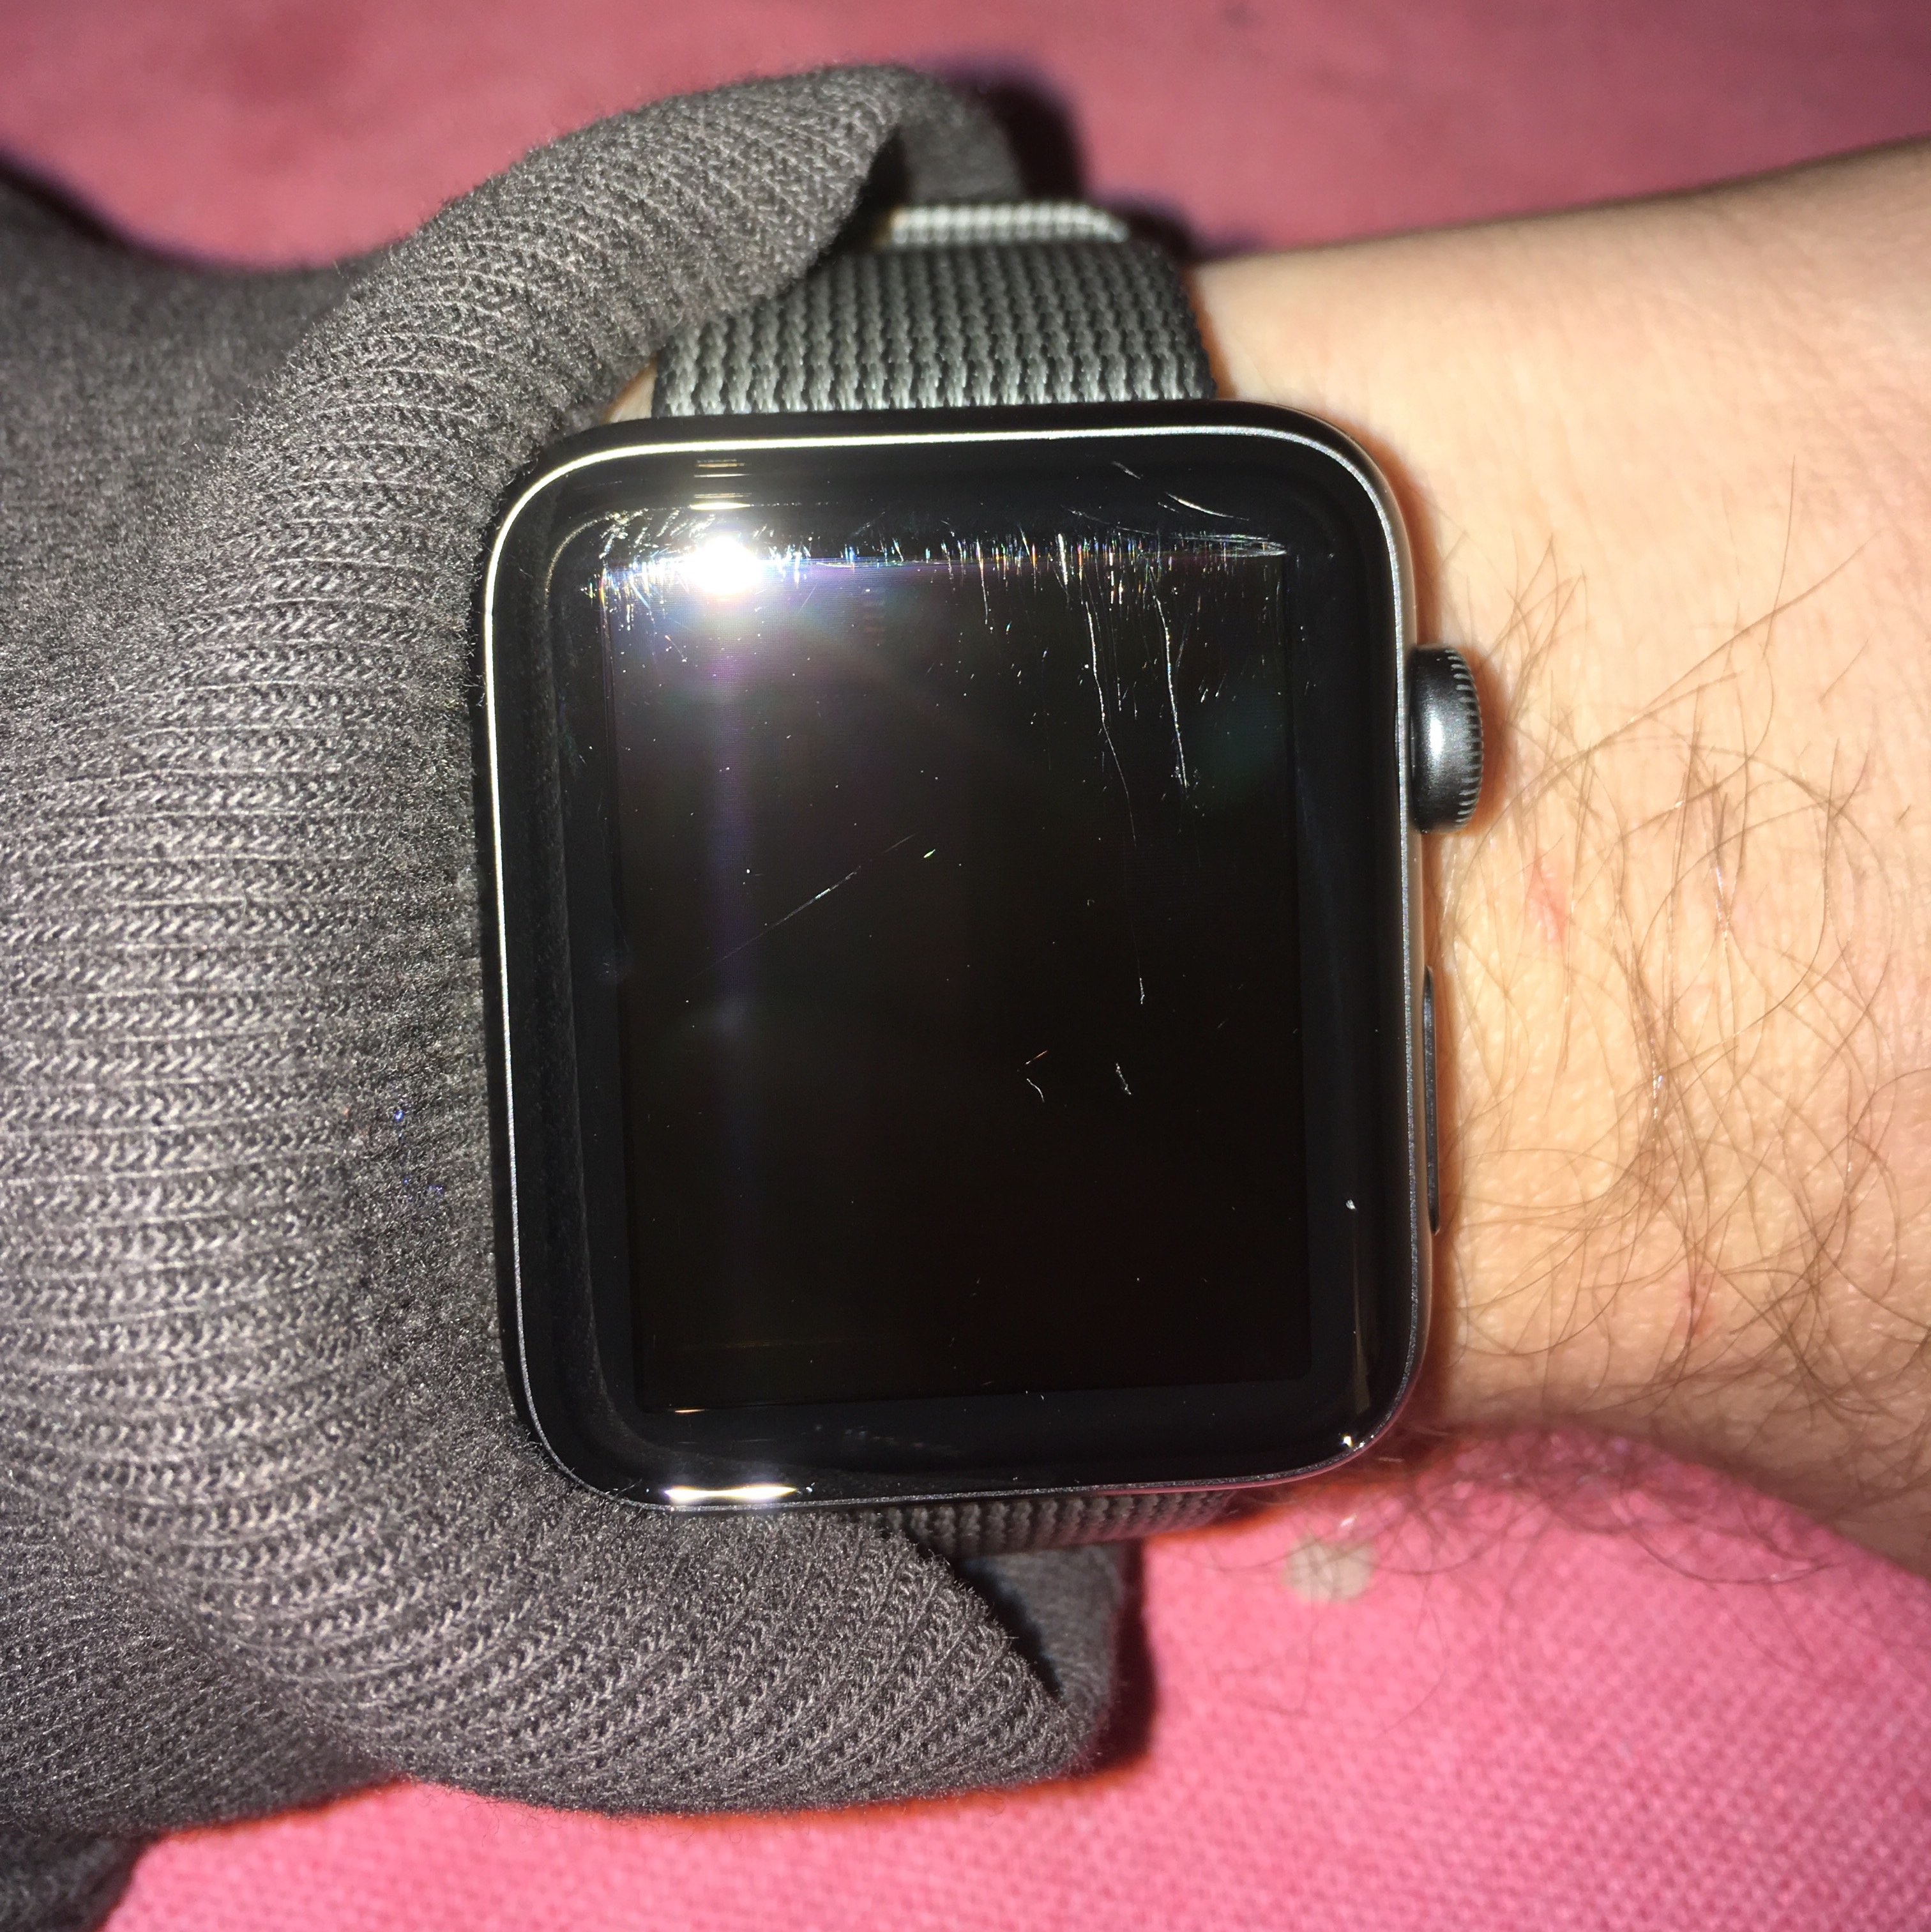 Best way to get rid of Apple Watch scratches without replacing the